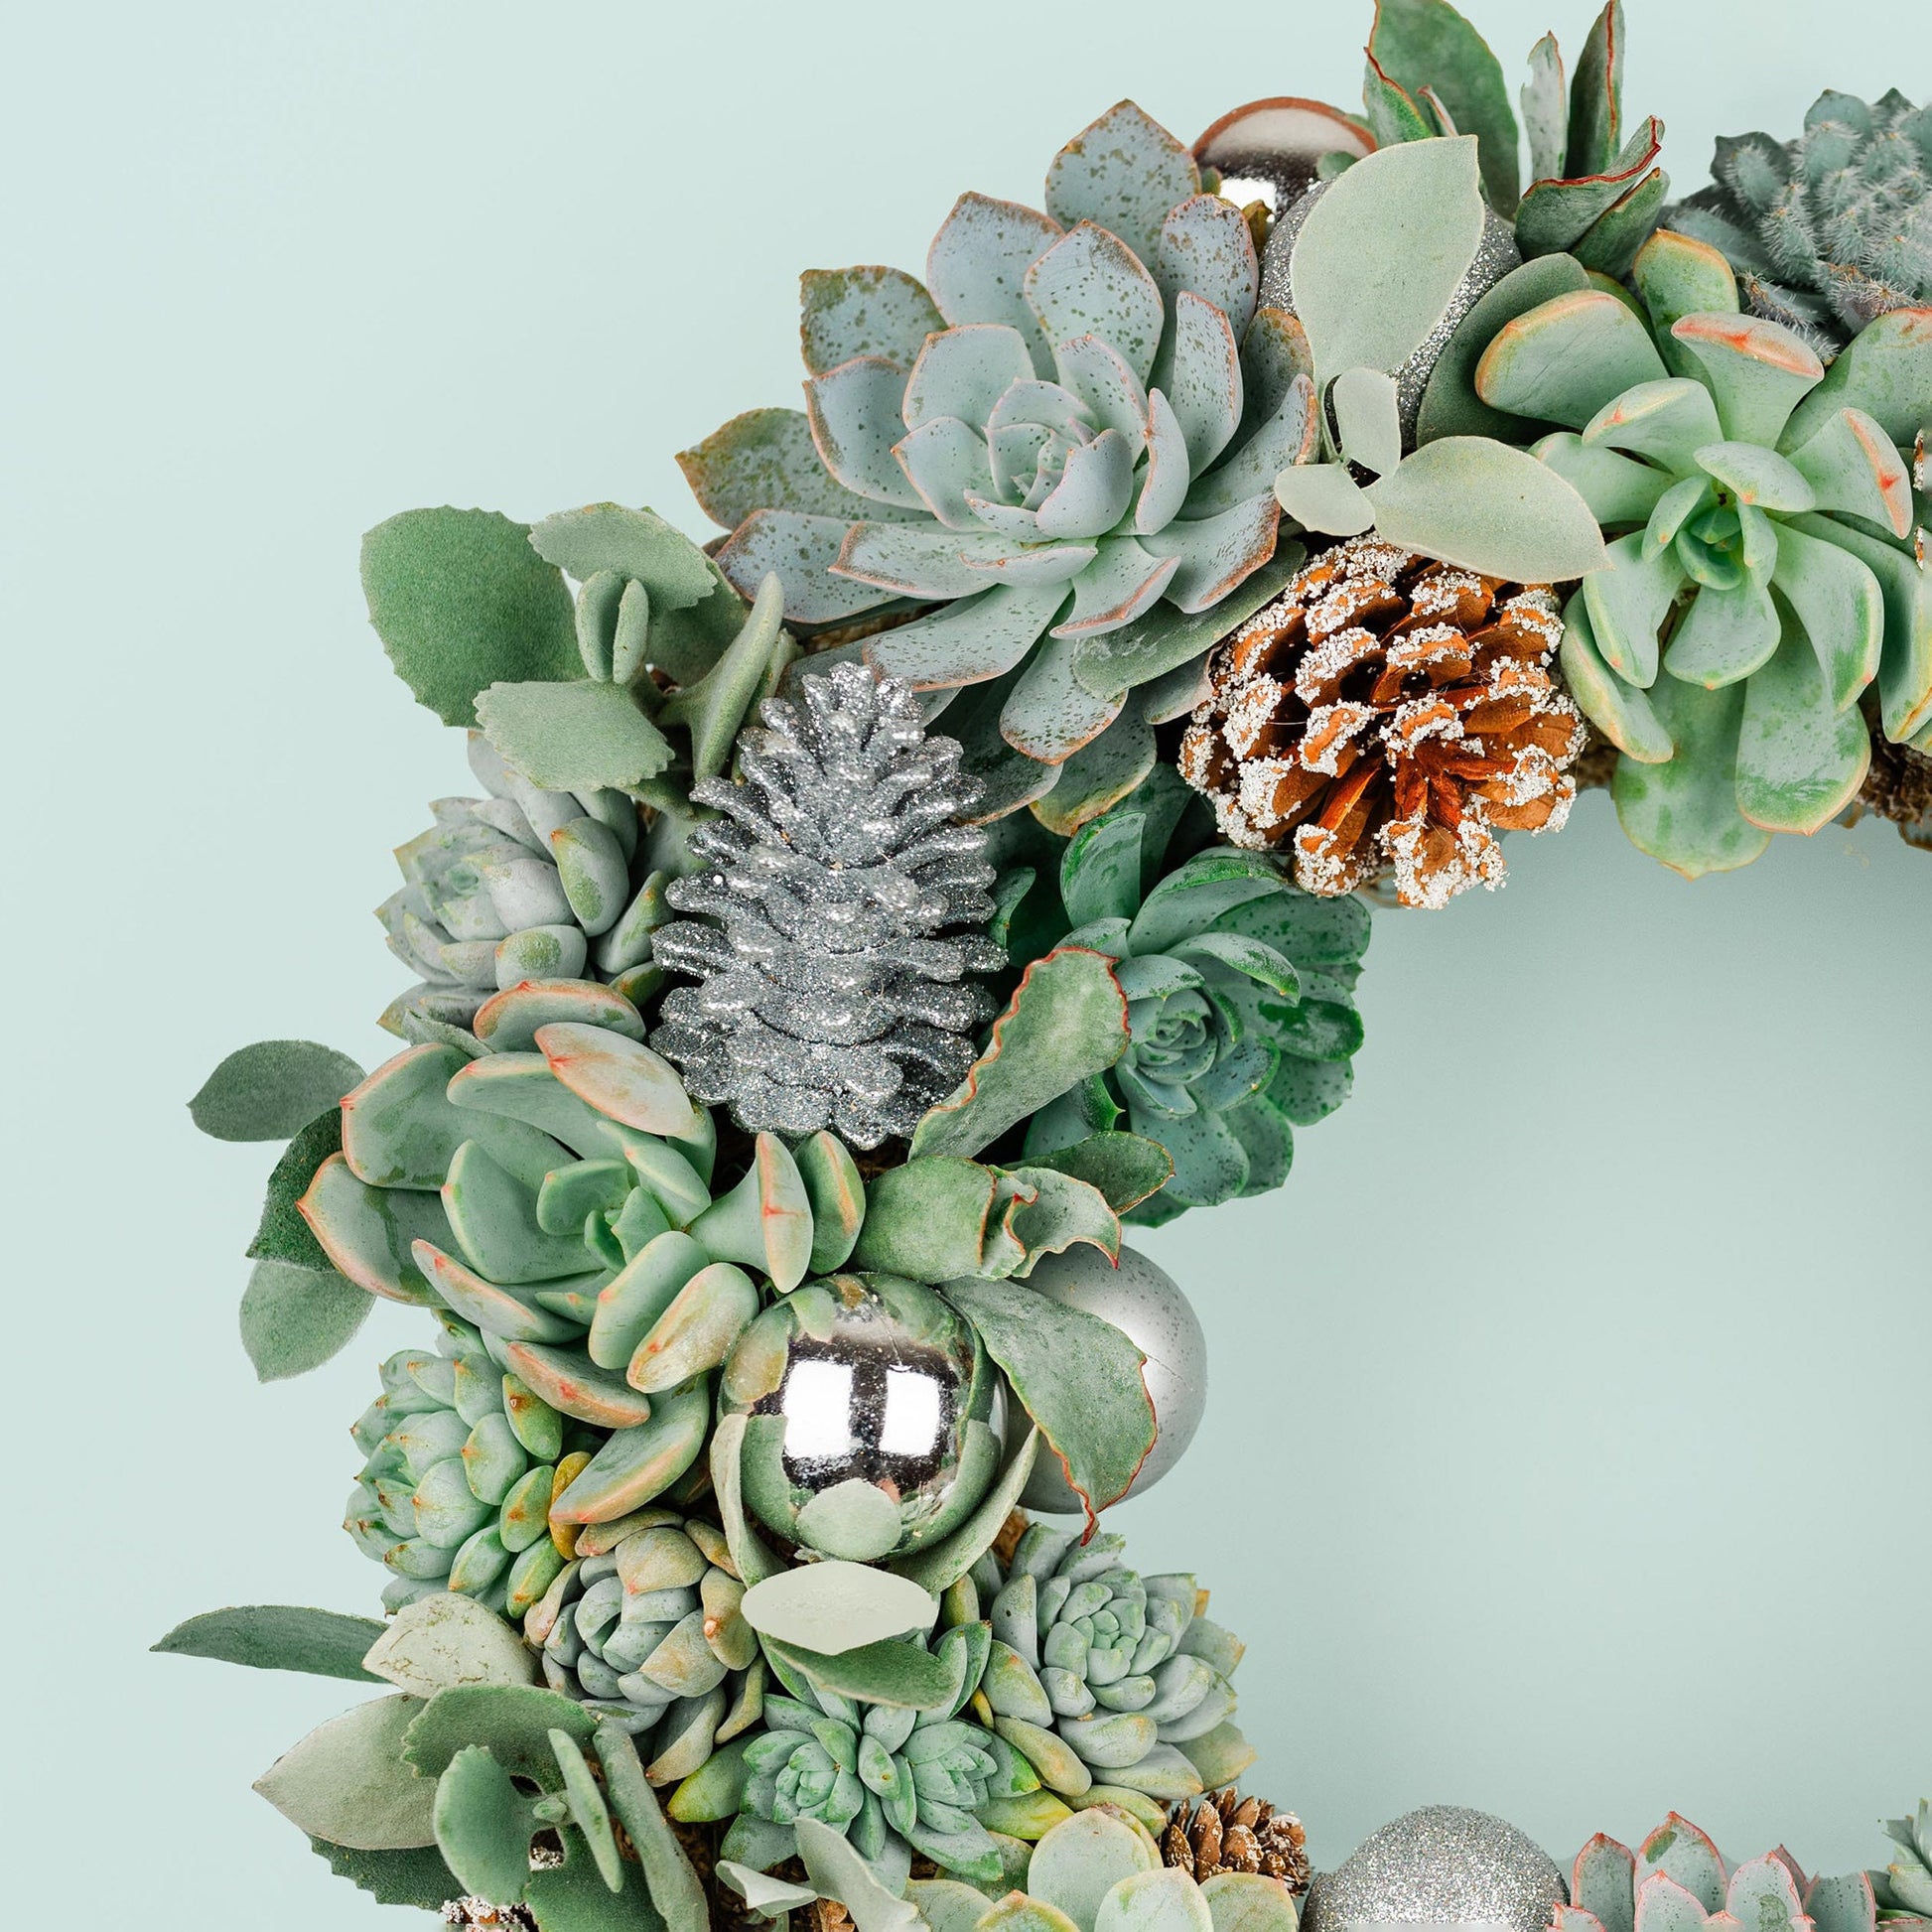 Winter Christmas Holiday Succulent Wreath with Living Plants in Blue-Green, Silver Ornaments, and Glitter Pine Cones for Front Door Entry